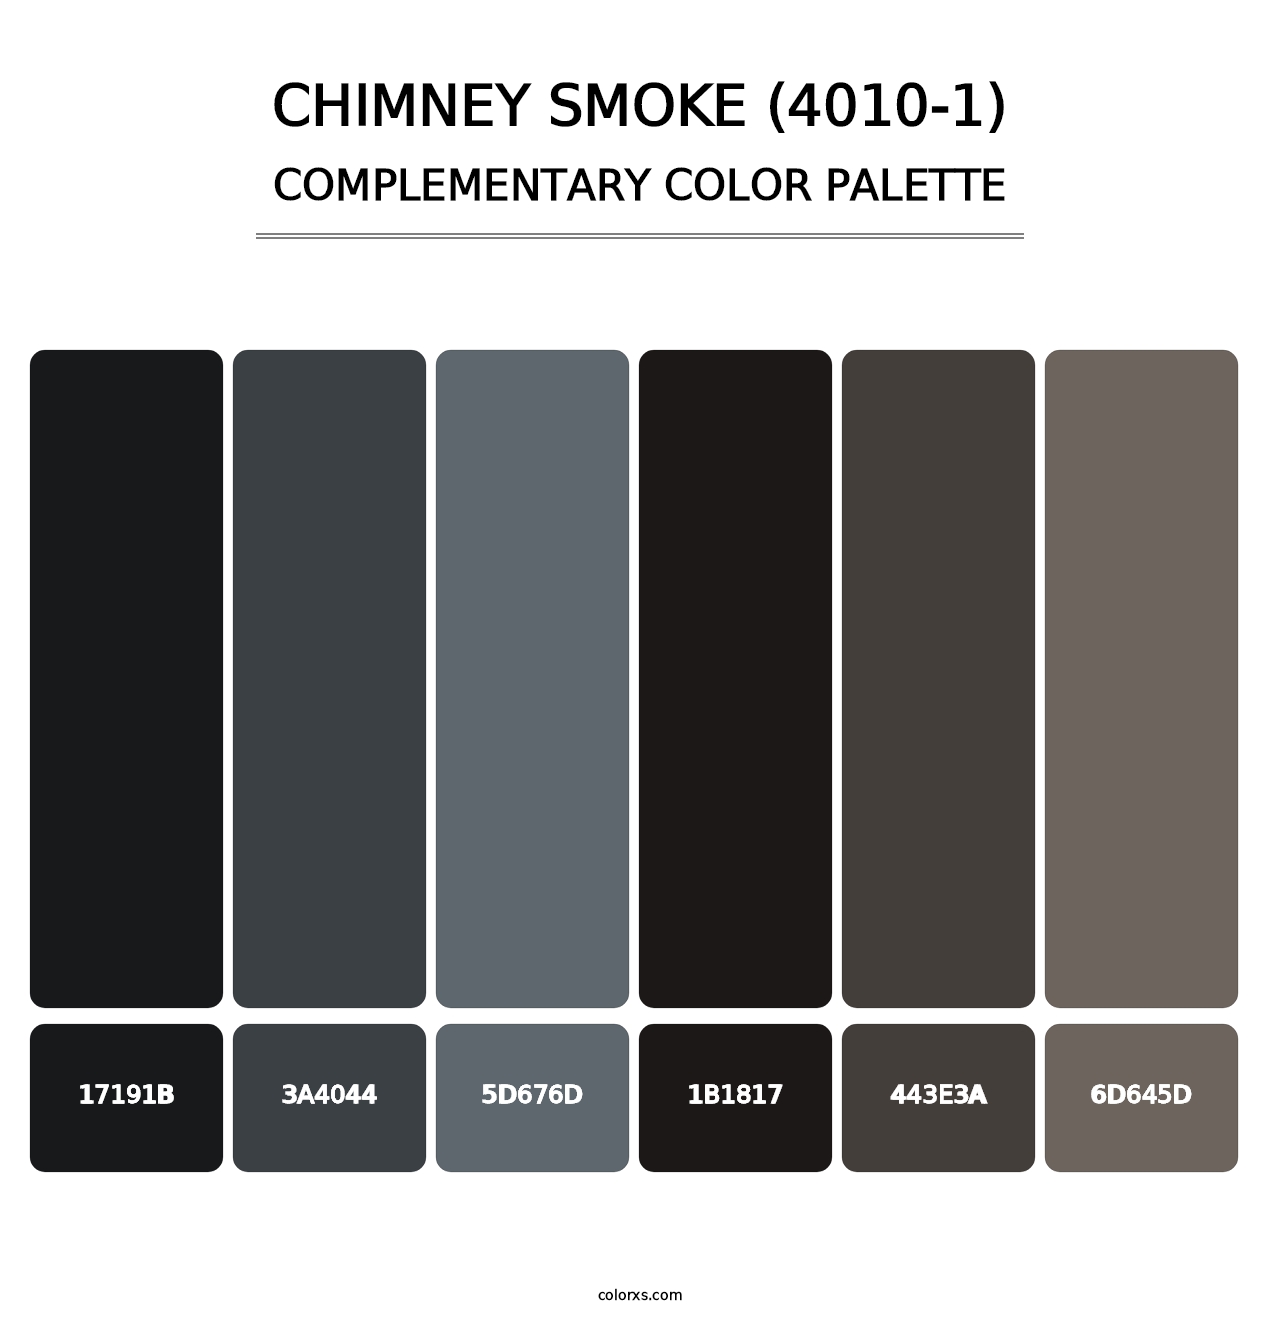 Chimney Smoke (4010-1) - Complementary Color Palette